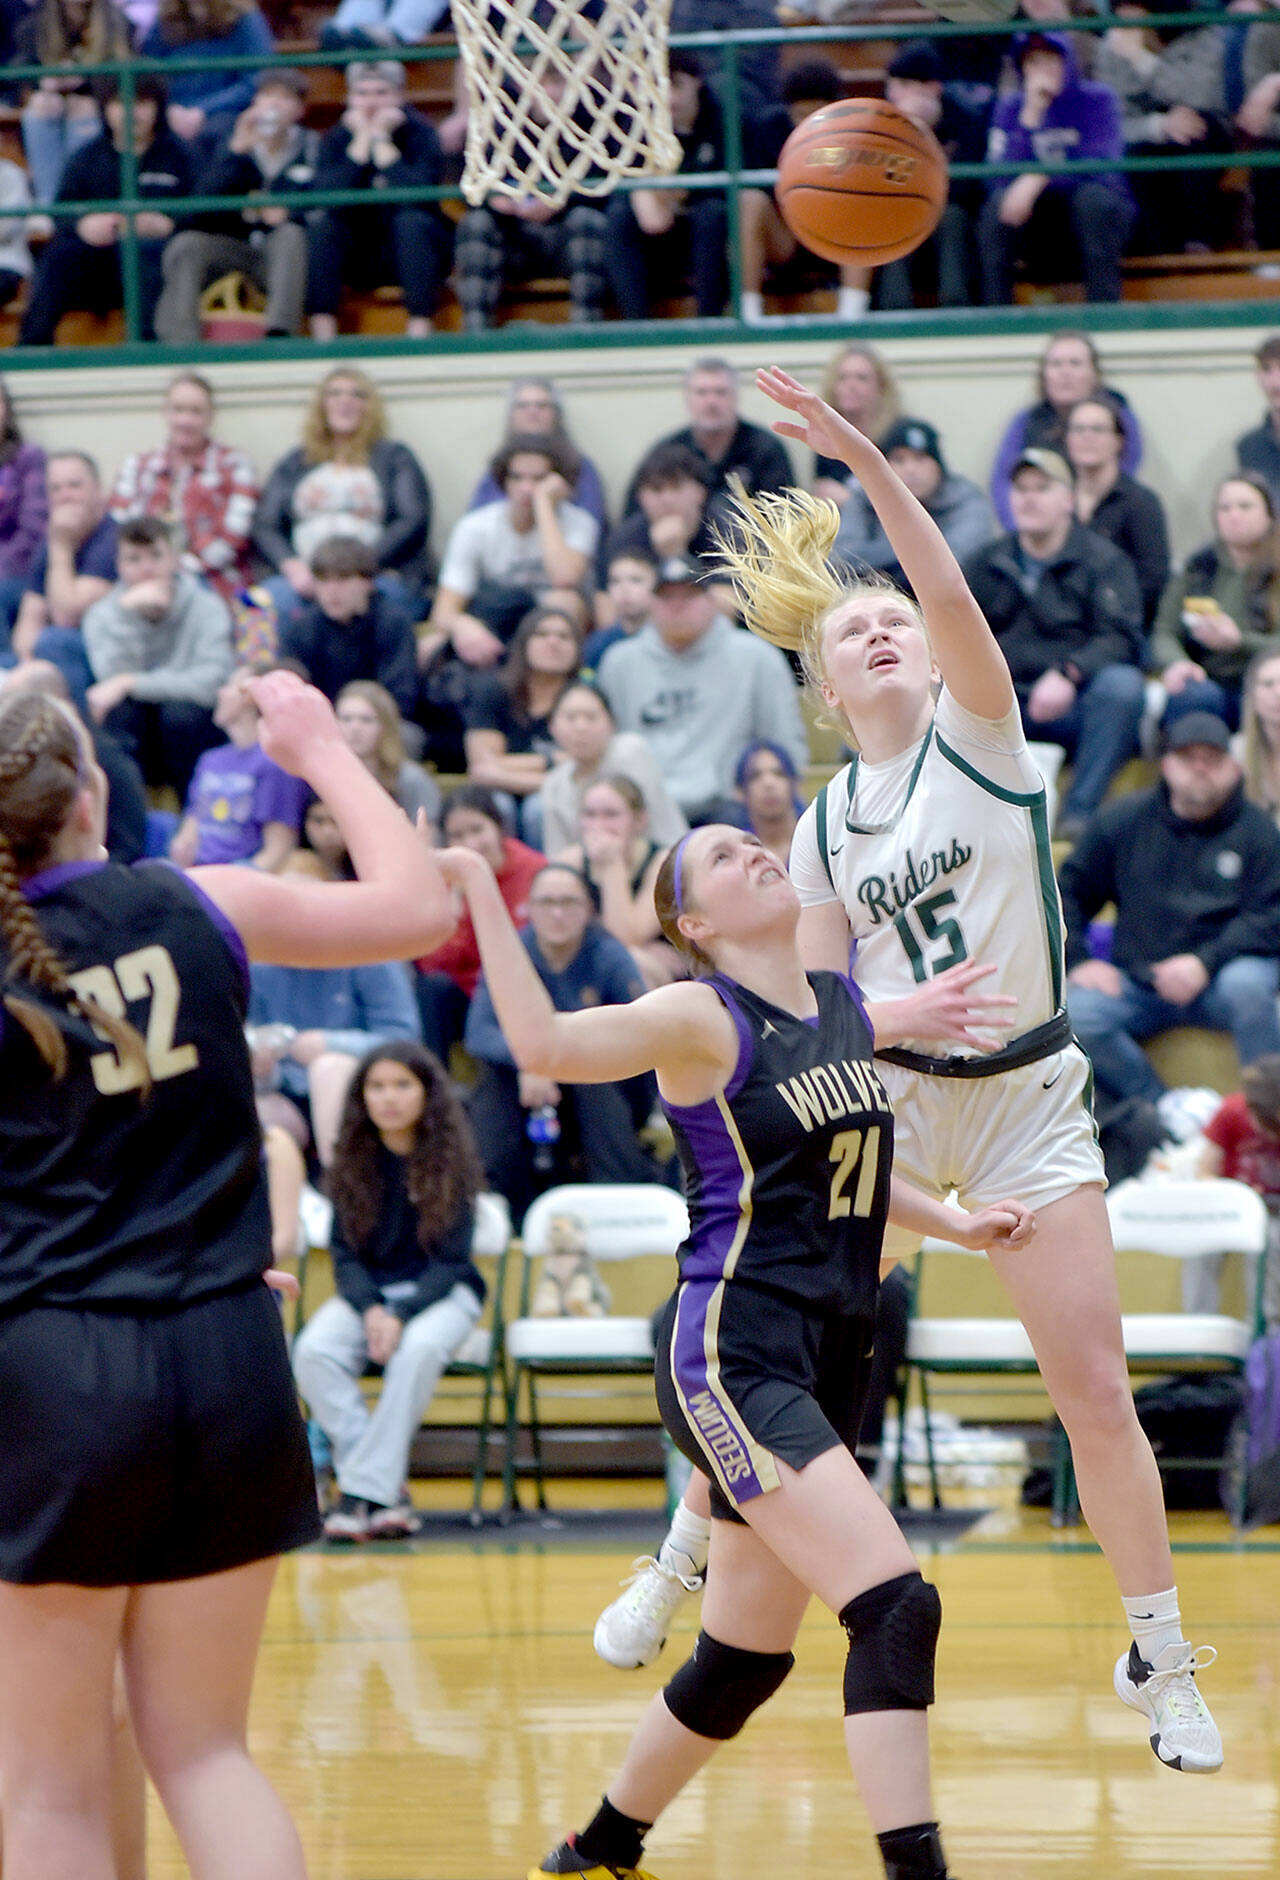 Port Angeles’ Paige Mason, right, puts up the ball over the head of Sequim’s Libby Turella as Sequim’s Hailey Wagner looks on at left on Tuesday at Port Angeles High School. Mason led the Roughriders with 26 points to help Port Angeles win 74-46 and clinch an Olympic League championship and a No. 1 seed for the playoffs. (KEITH THORPE/PENINSULA DAILY NEWS)